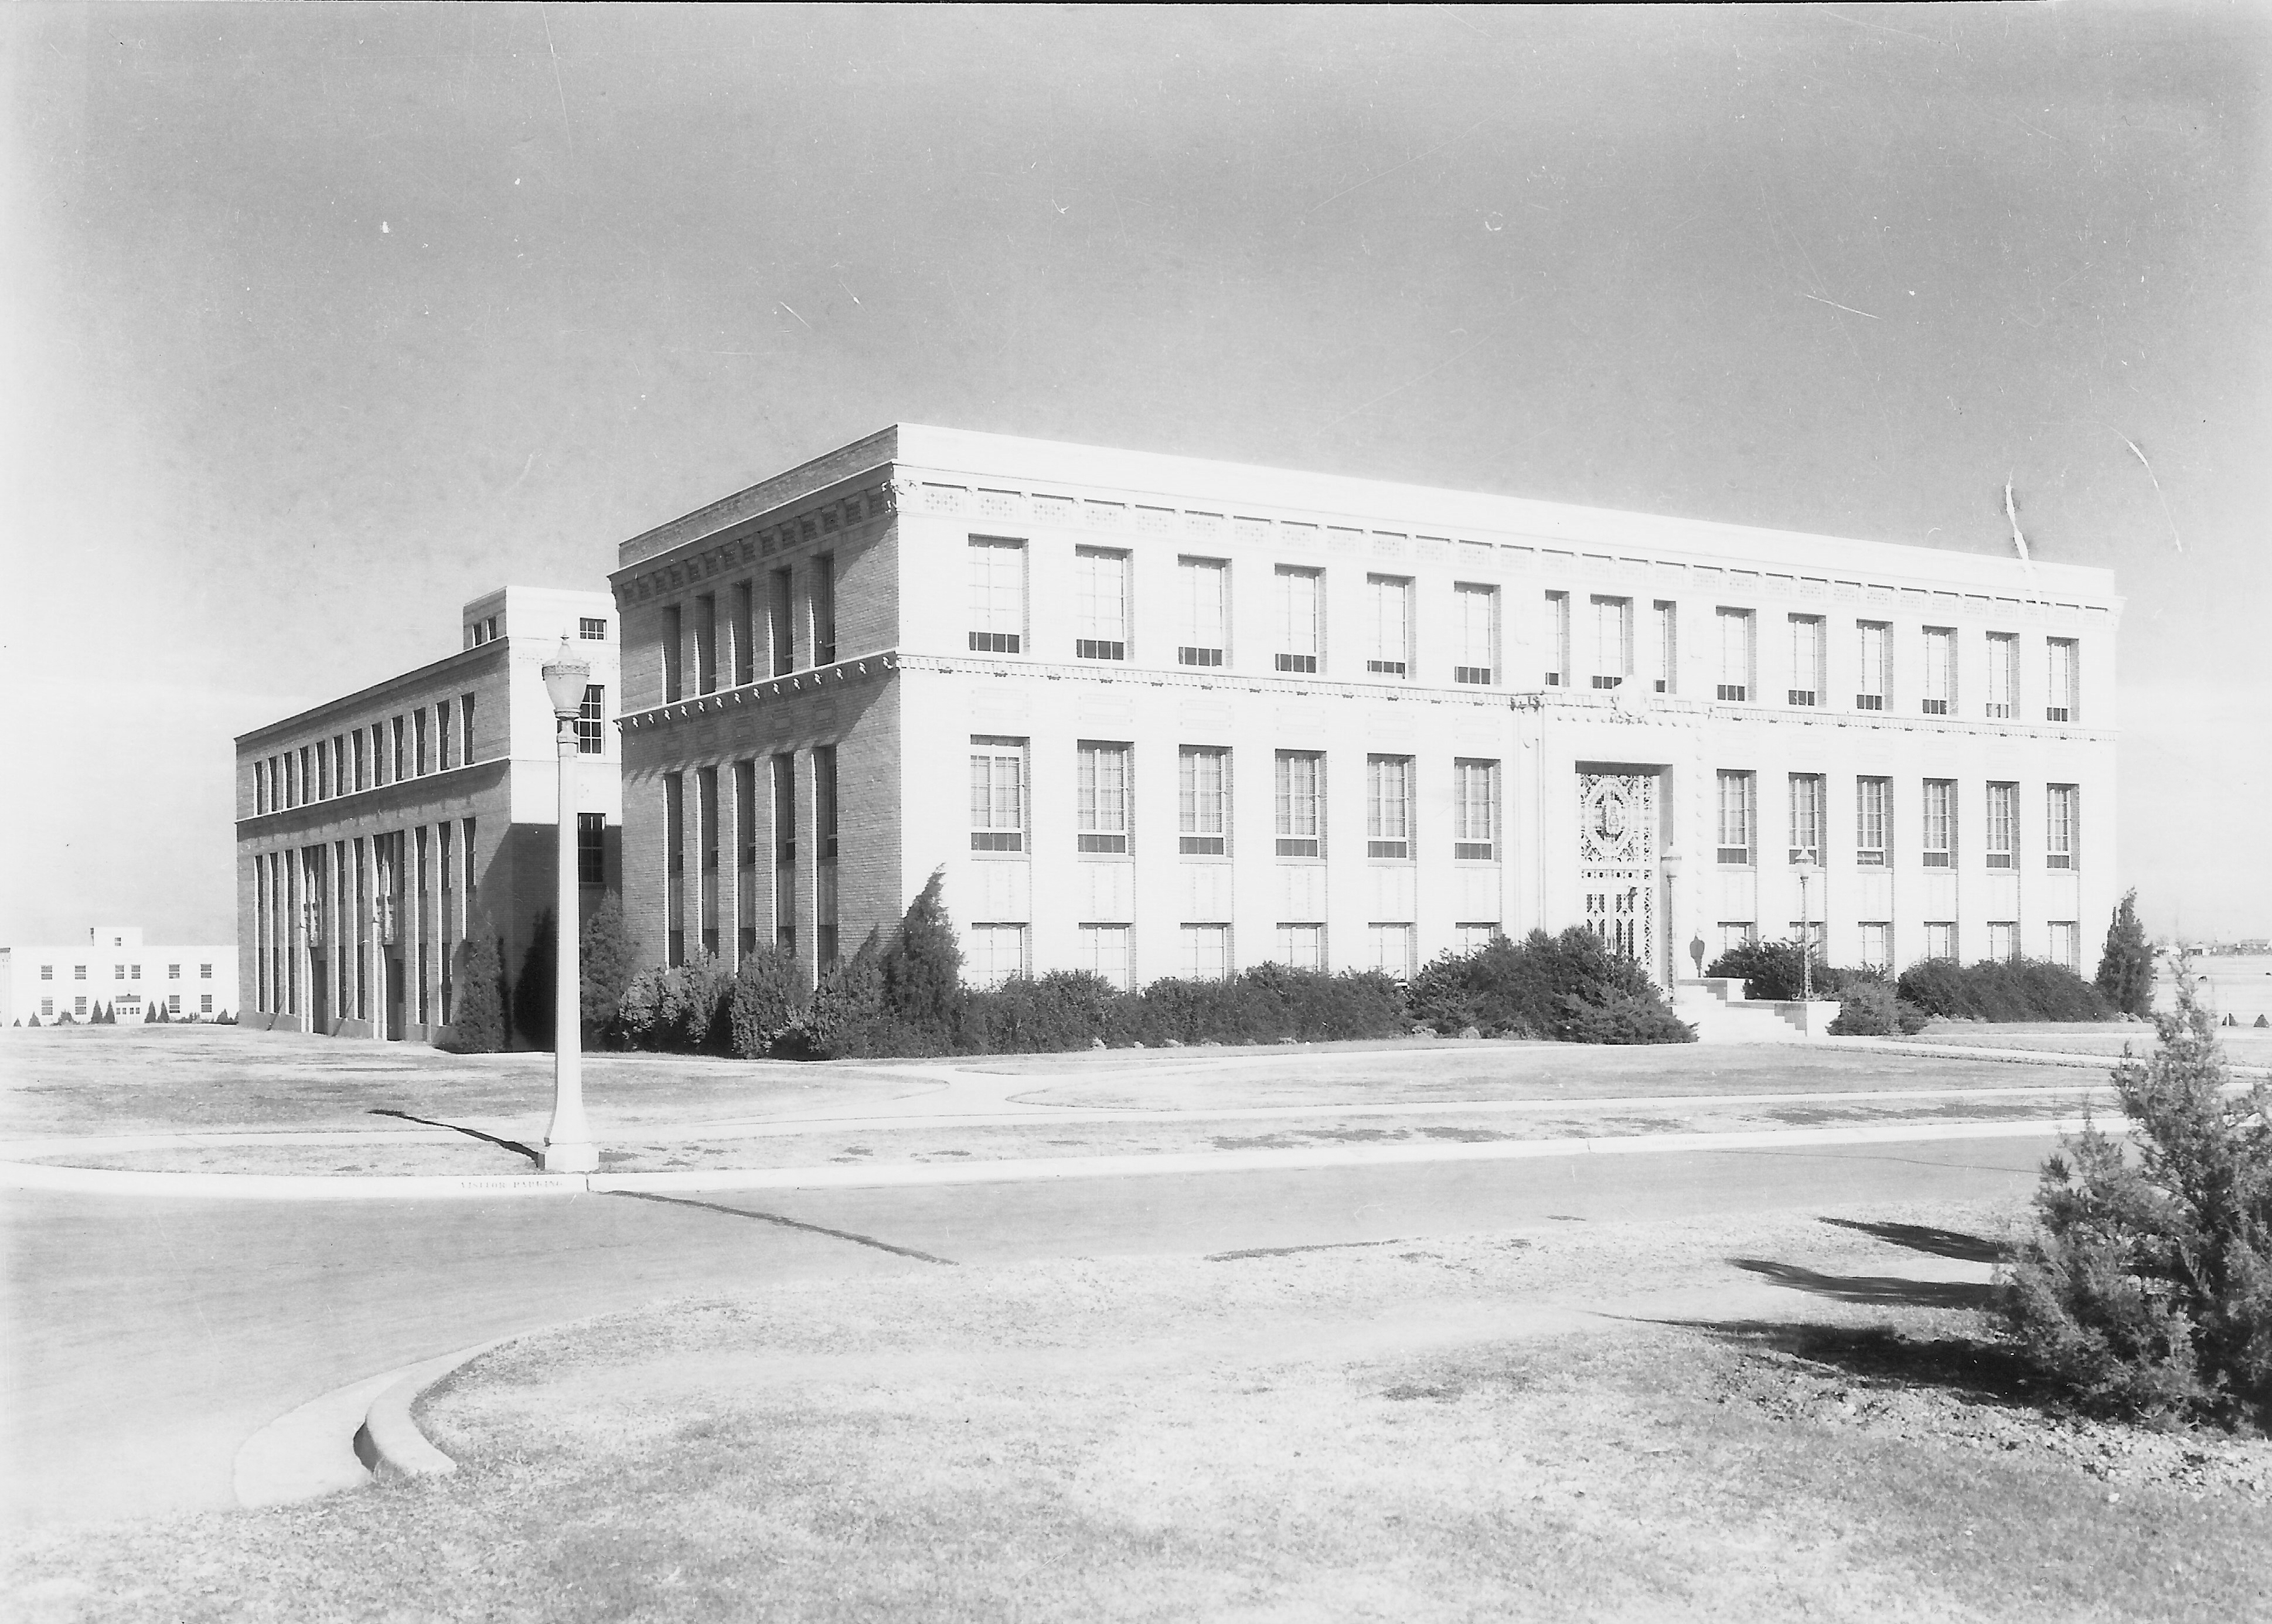 The Agricultural Engineering Building as it appeared in 1937, shortly after construction in 1933.